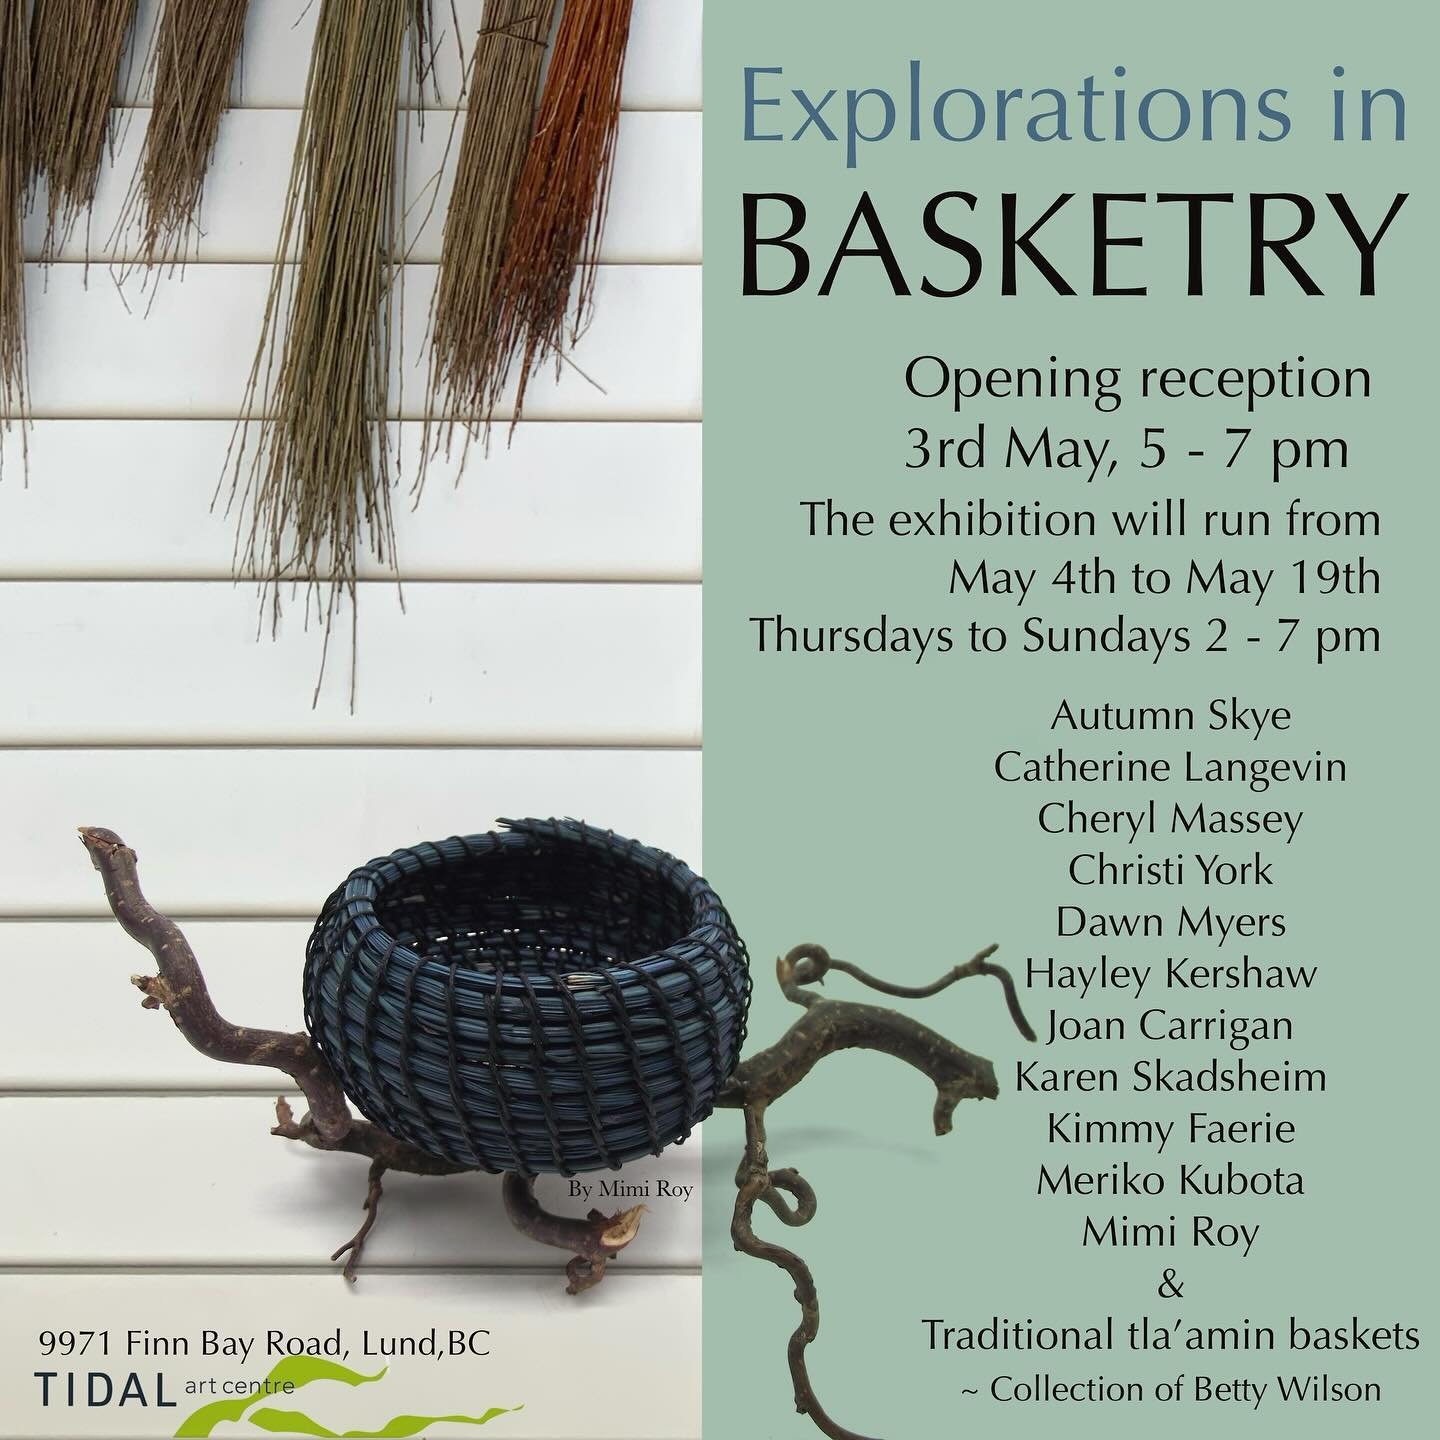 THIS weekend! You need to see the fantastic variation in basketry styles, all made with locally grown or found materials. #justletmeweave #basketmaker #willow #willowbaskets #tidalartscentre #lund #sustainablearts